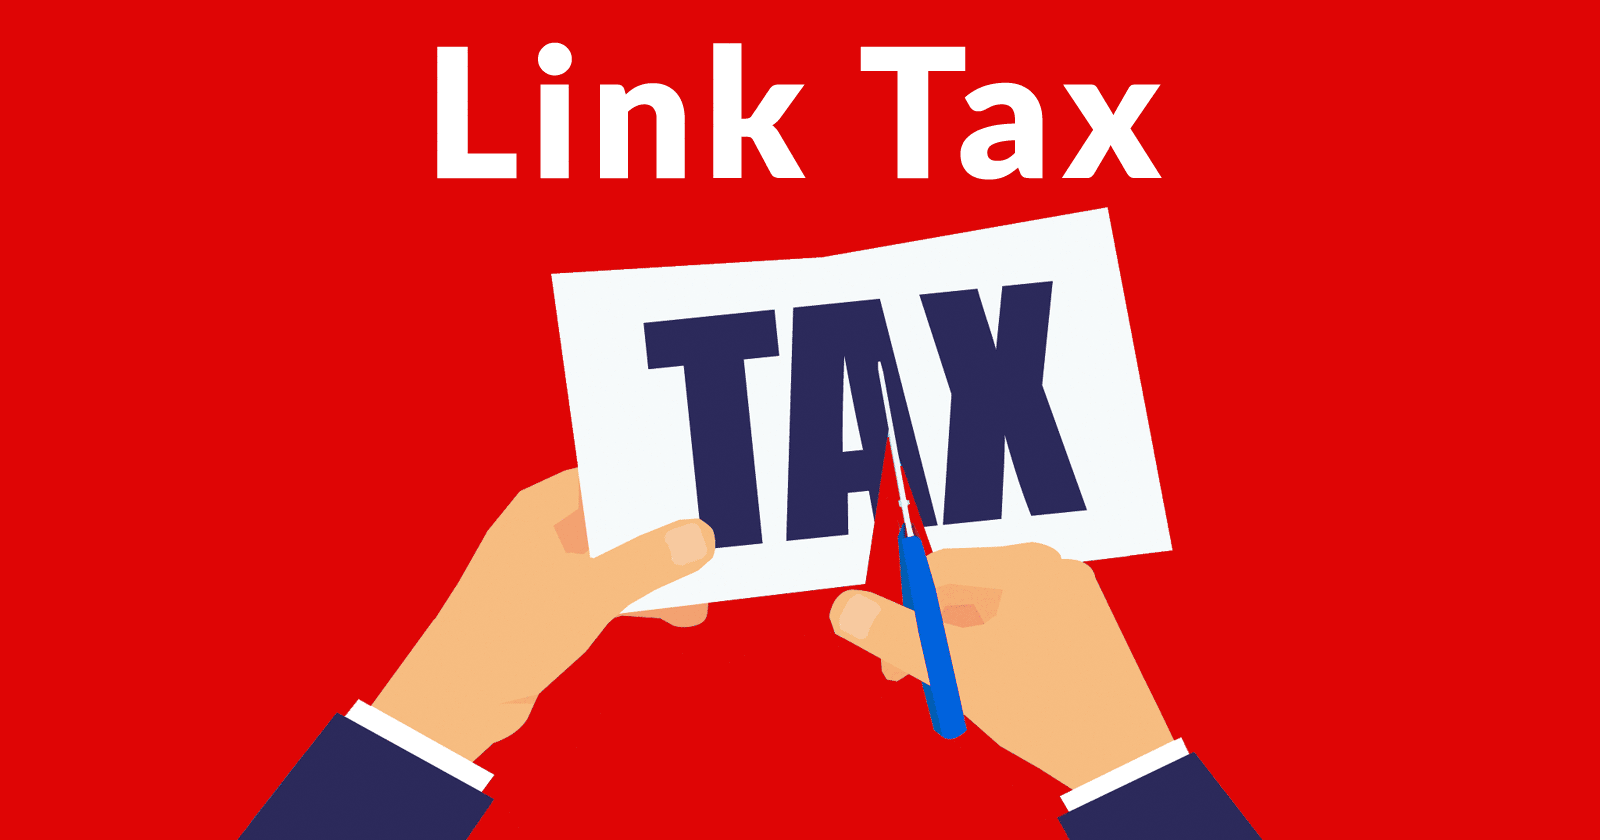 Image of hands cutting a paper labeled with the word Tax. The words Link Tax are above it.